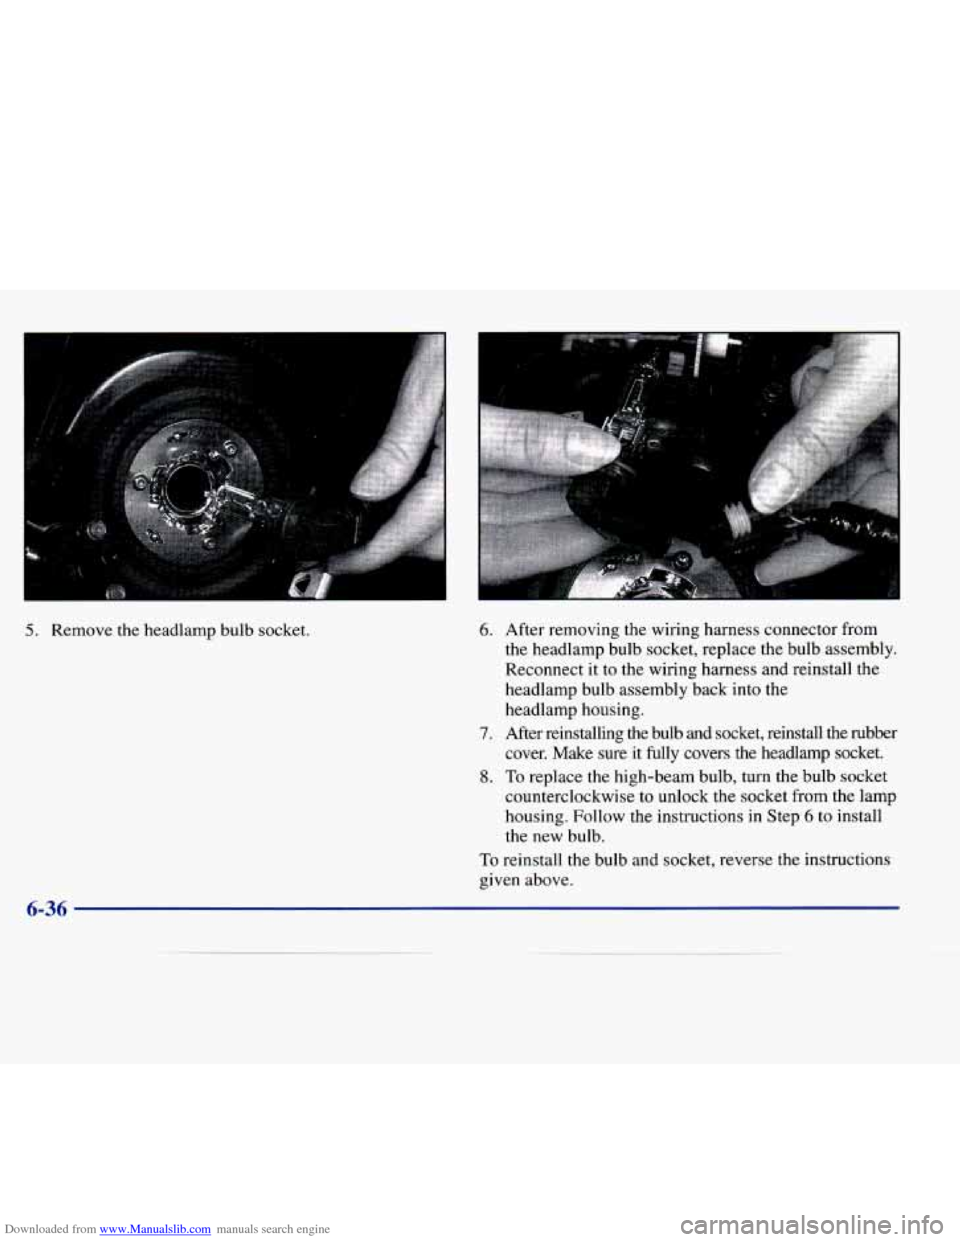 CADILLAC SEVILLE 1998 4.G User Guide Downloaded from www.Manualslib.com manuals search engine 5. Remove the headlamp  bulb  socket. 6. 
7. 
8. 
After removing the wiring harness  connector  from 
the  headlamp  bulb socket, replace the  